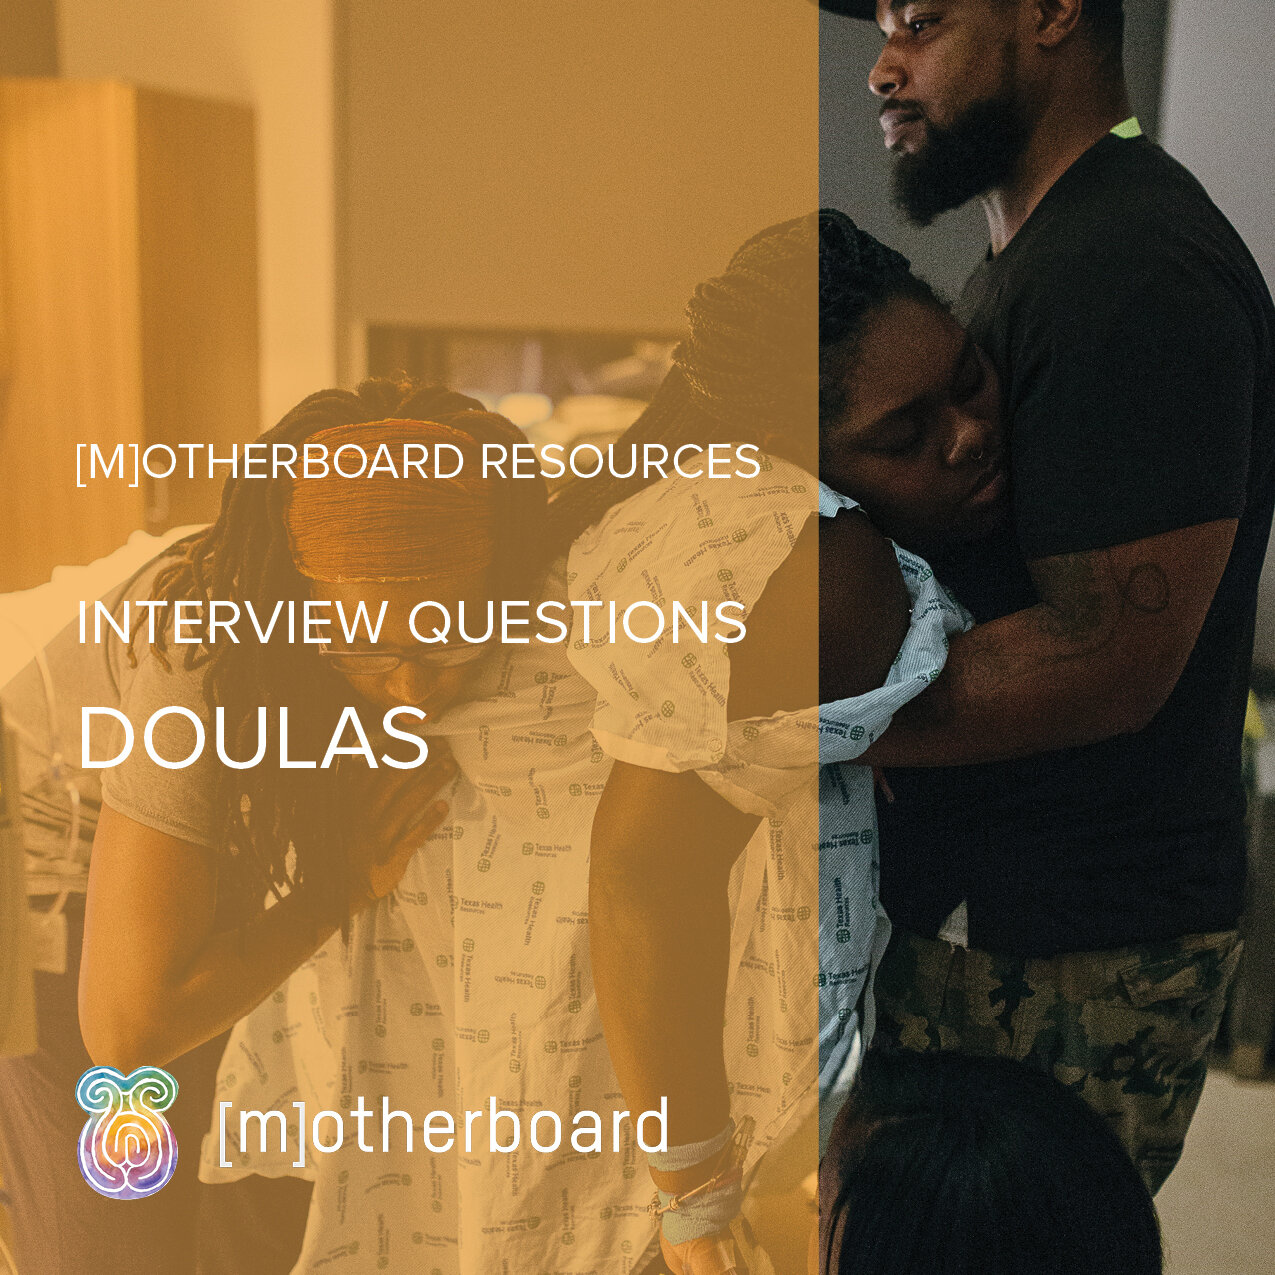 INTERVIEWING DOULAS